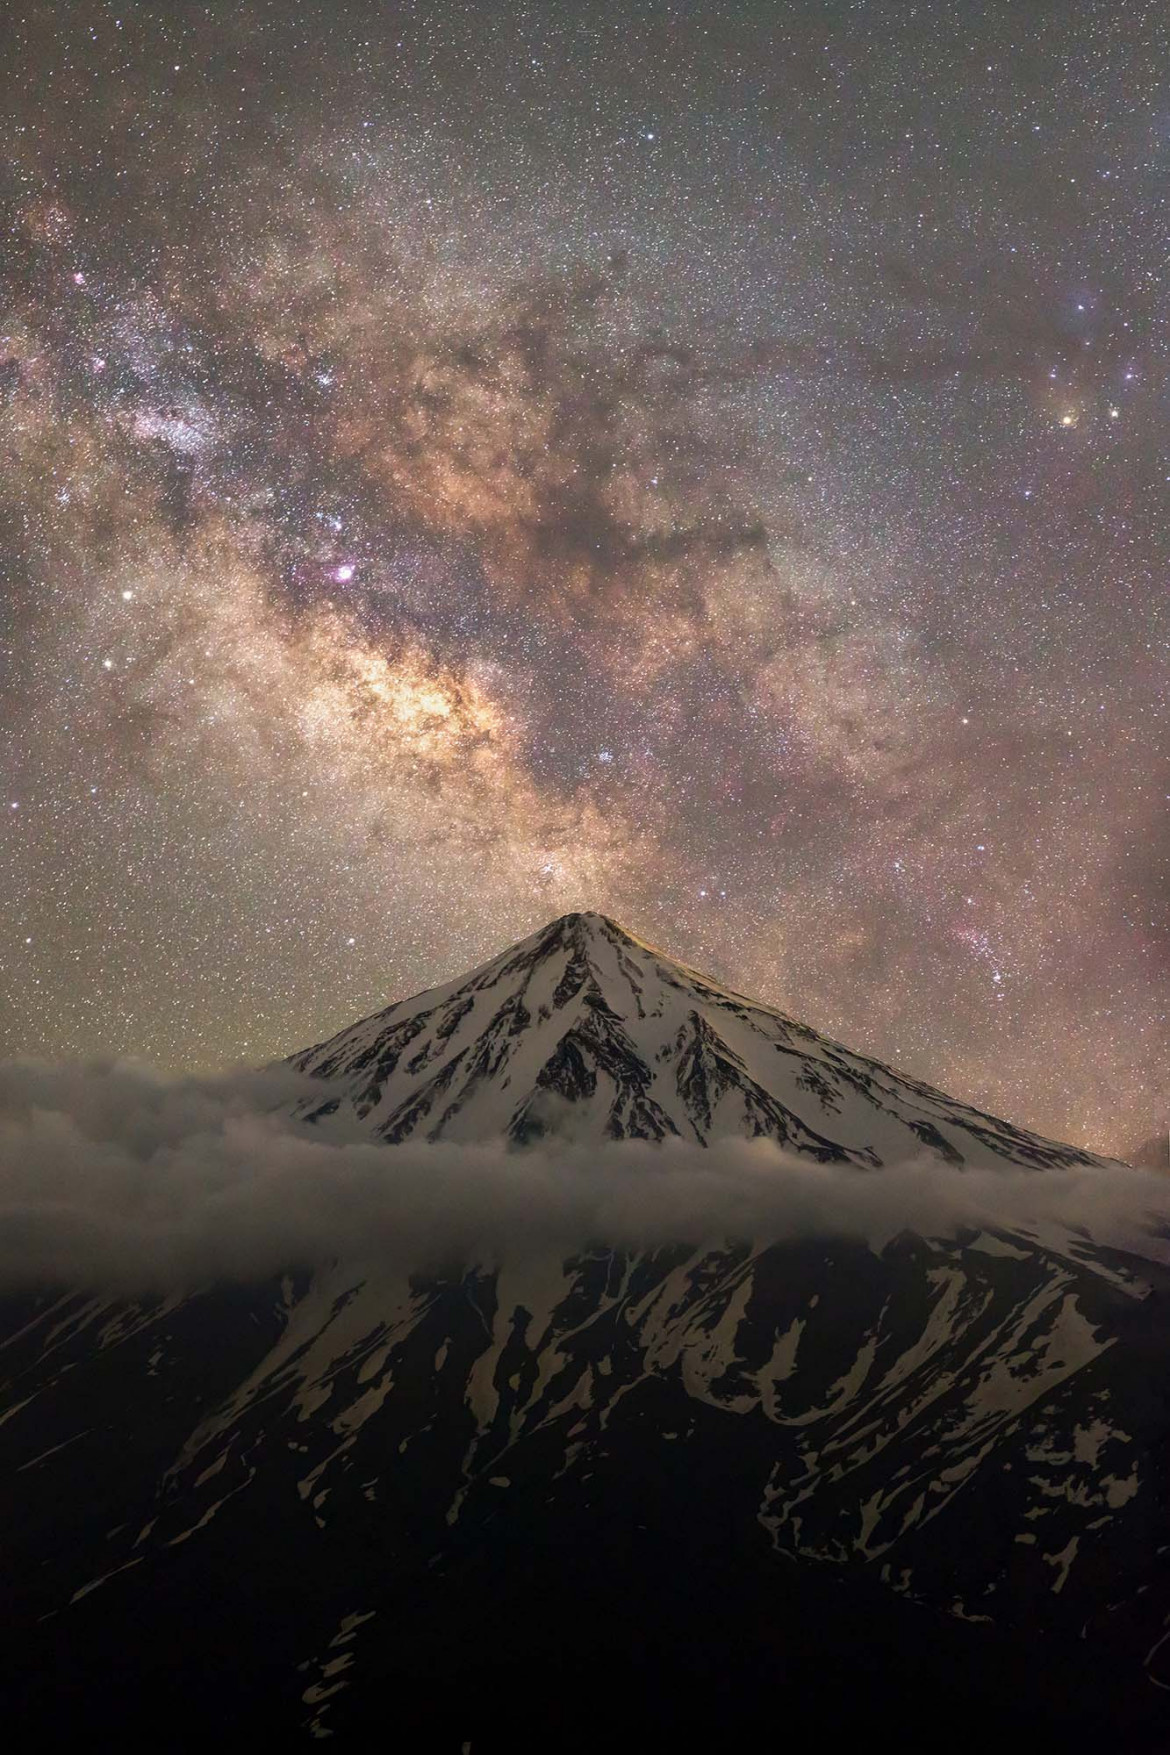 fot. Majid Ghohroodi, "Embrace the Mountains, heart of the Universe!" / Insight Investment Astronomy Photographer of the Year 2019